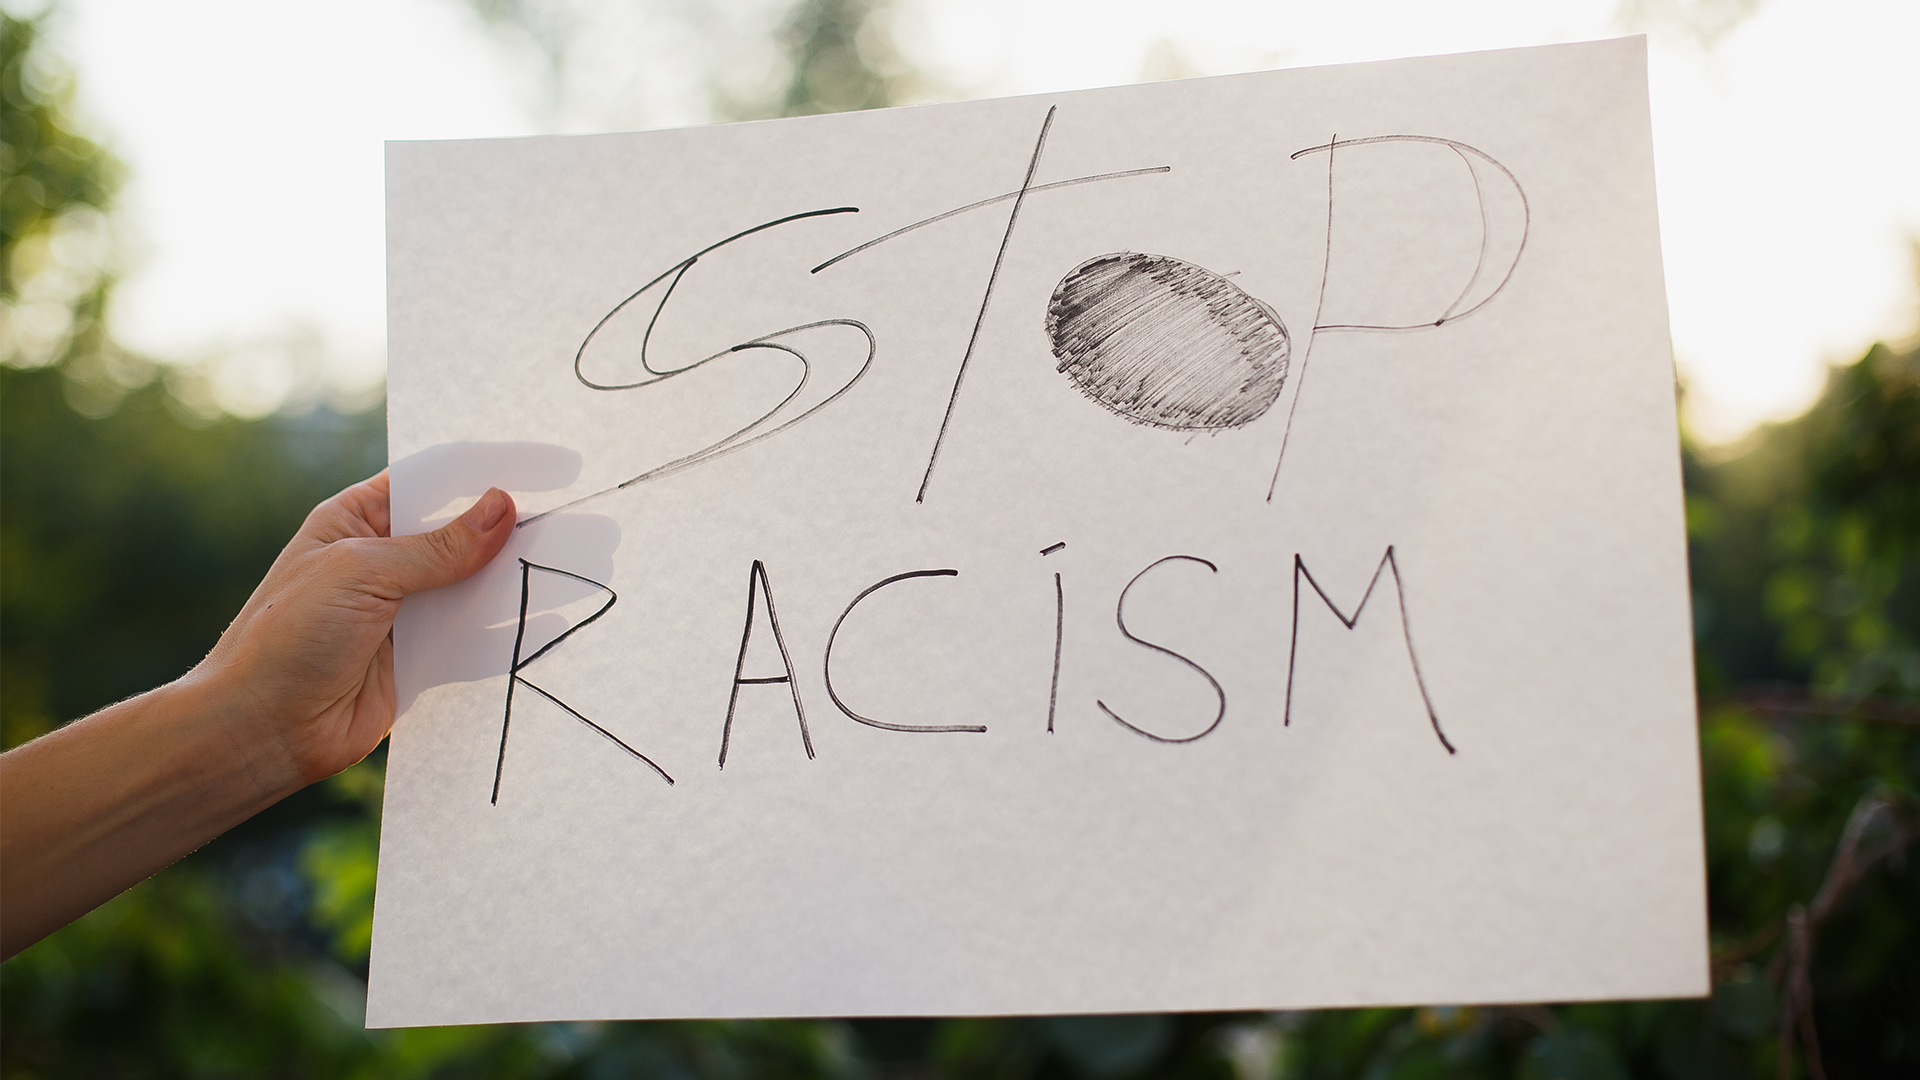 Woman holding white paper with text "Stop racism". Against the background of trees and sunlight